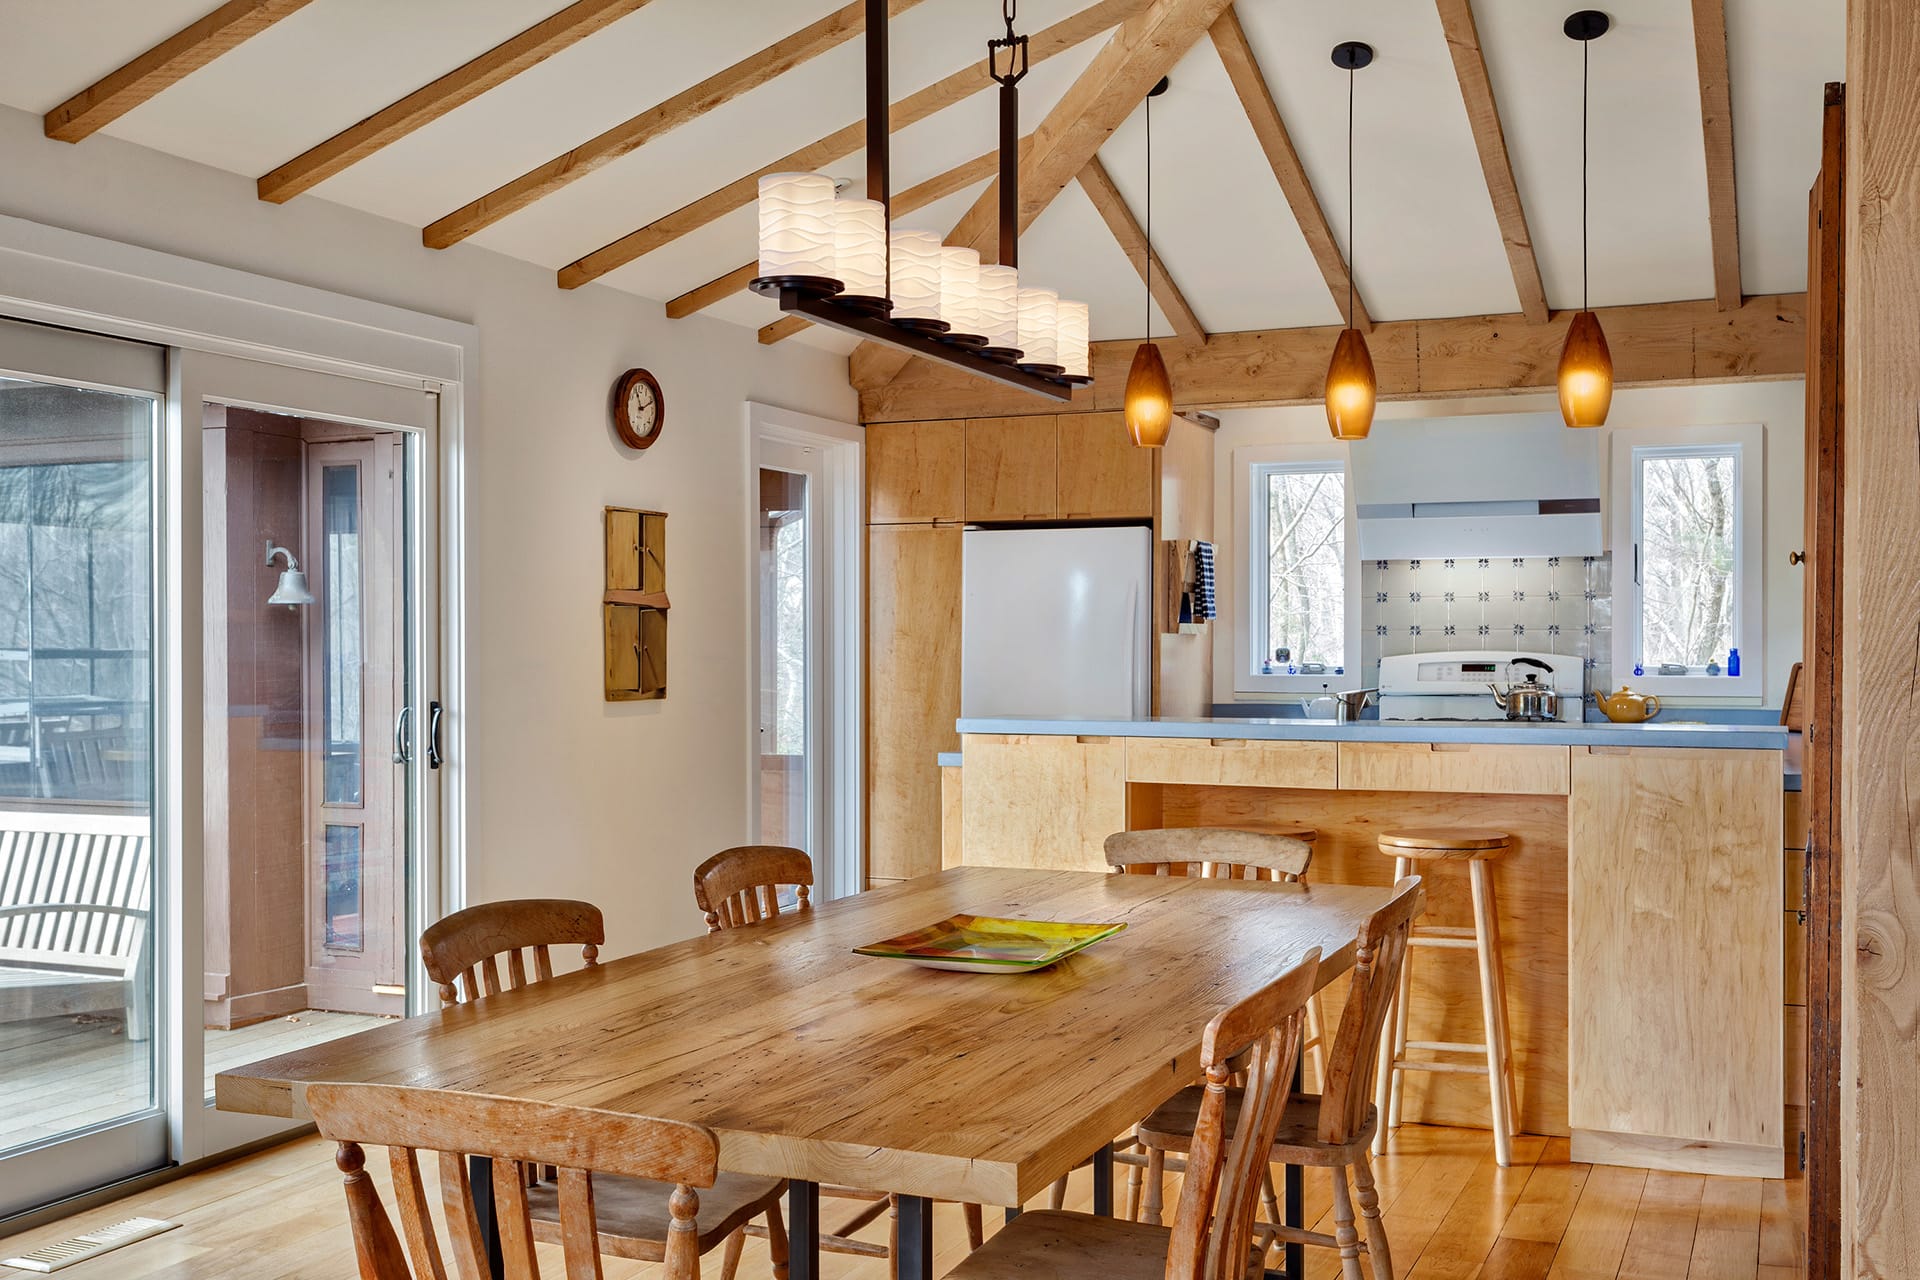 Dining area in front of the kitchen in a Connecticut home. The wooden table matches the floors, cabinetry, and exposed ceiling beams.